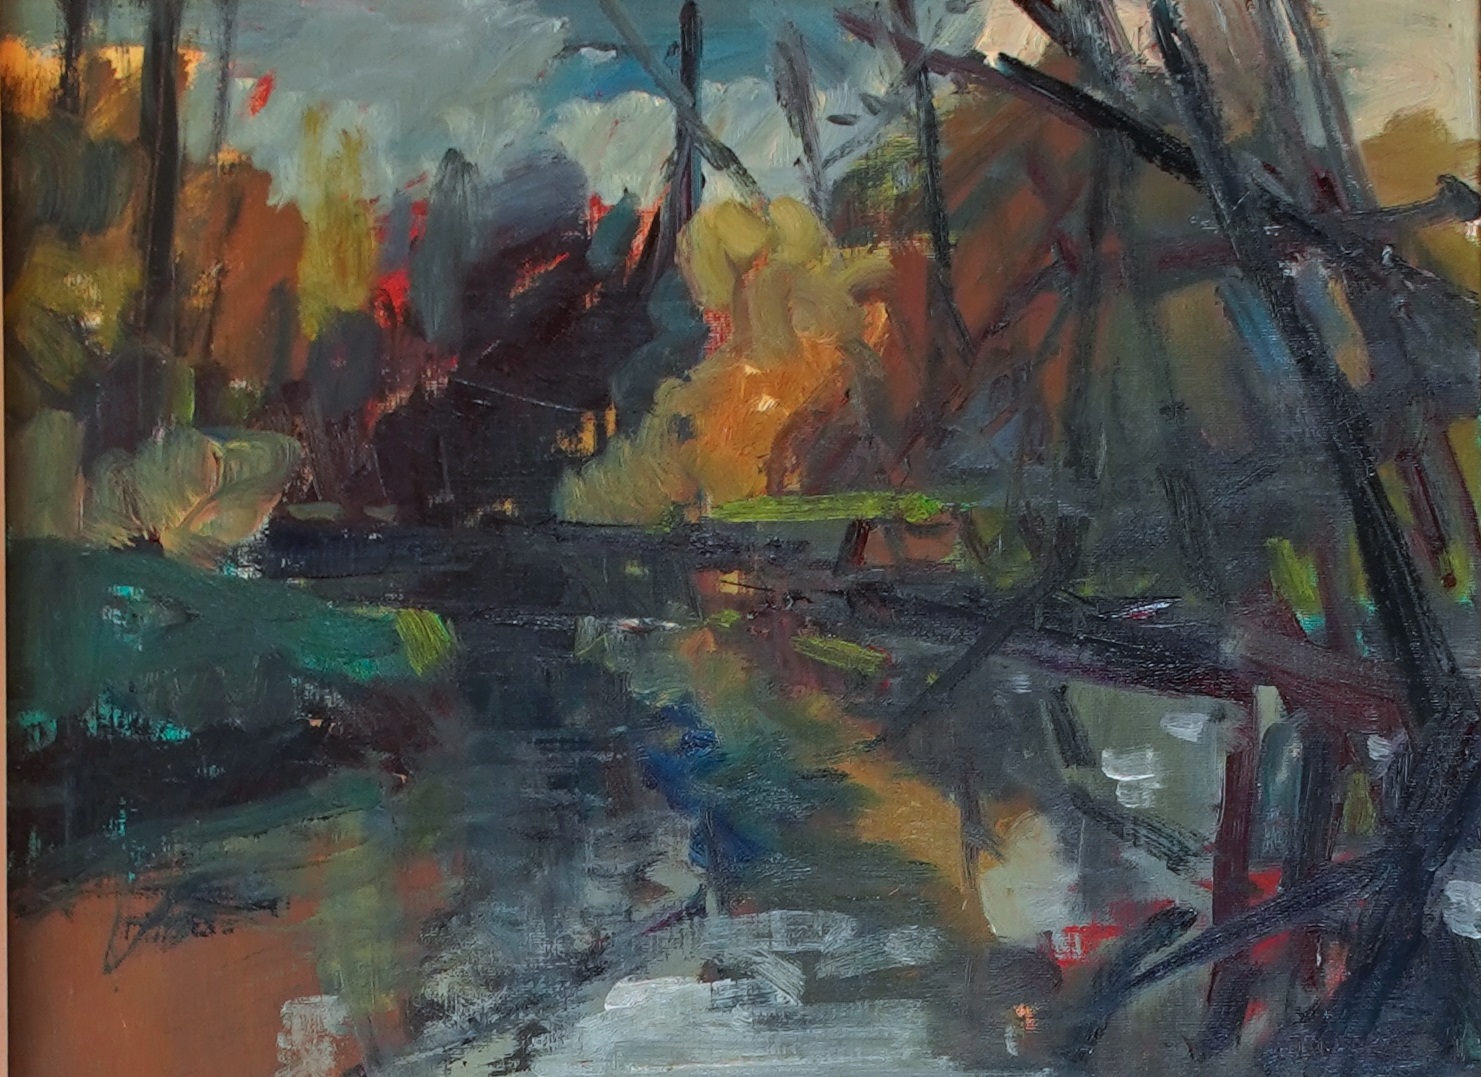 'River and Trees', oil on canvas, 46cm x 61cm, £5000